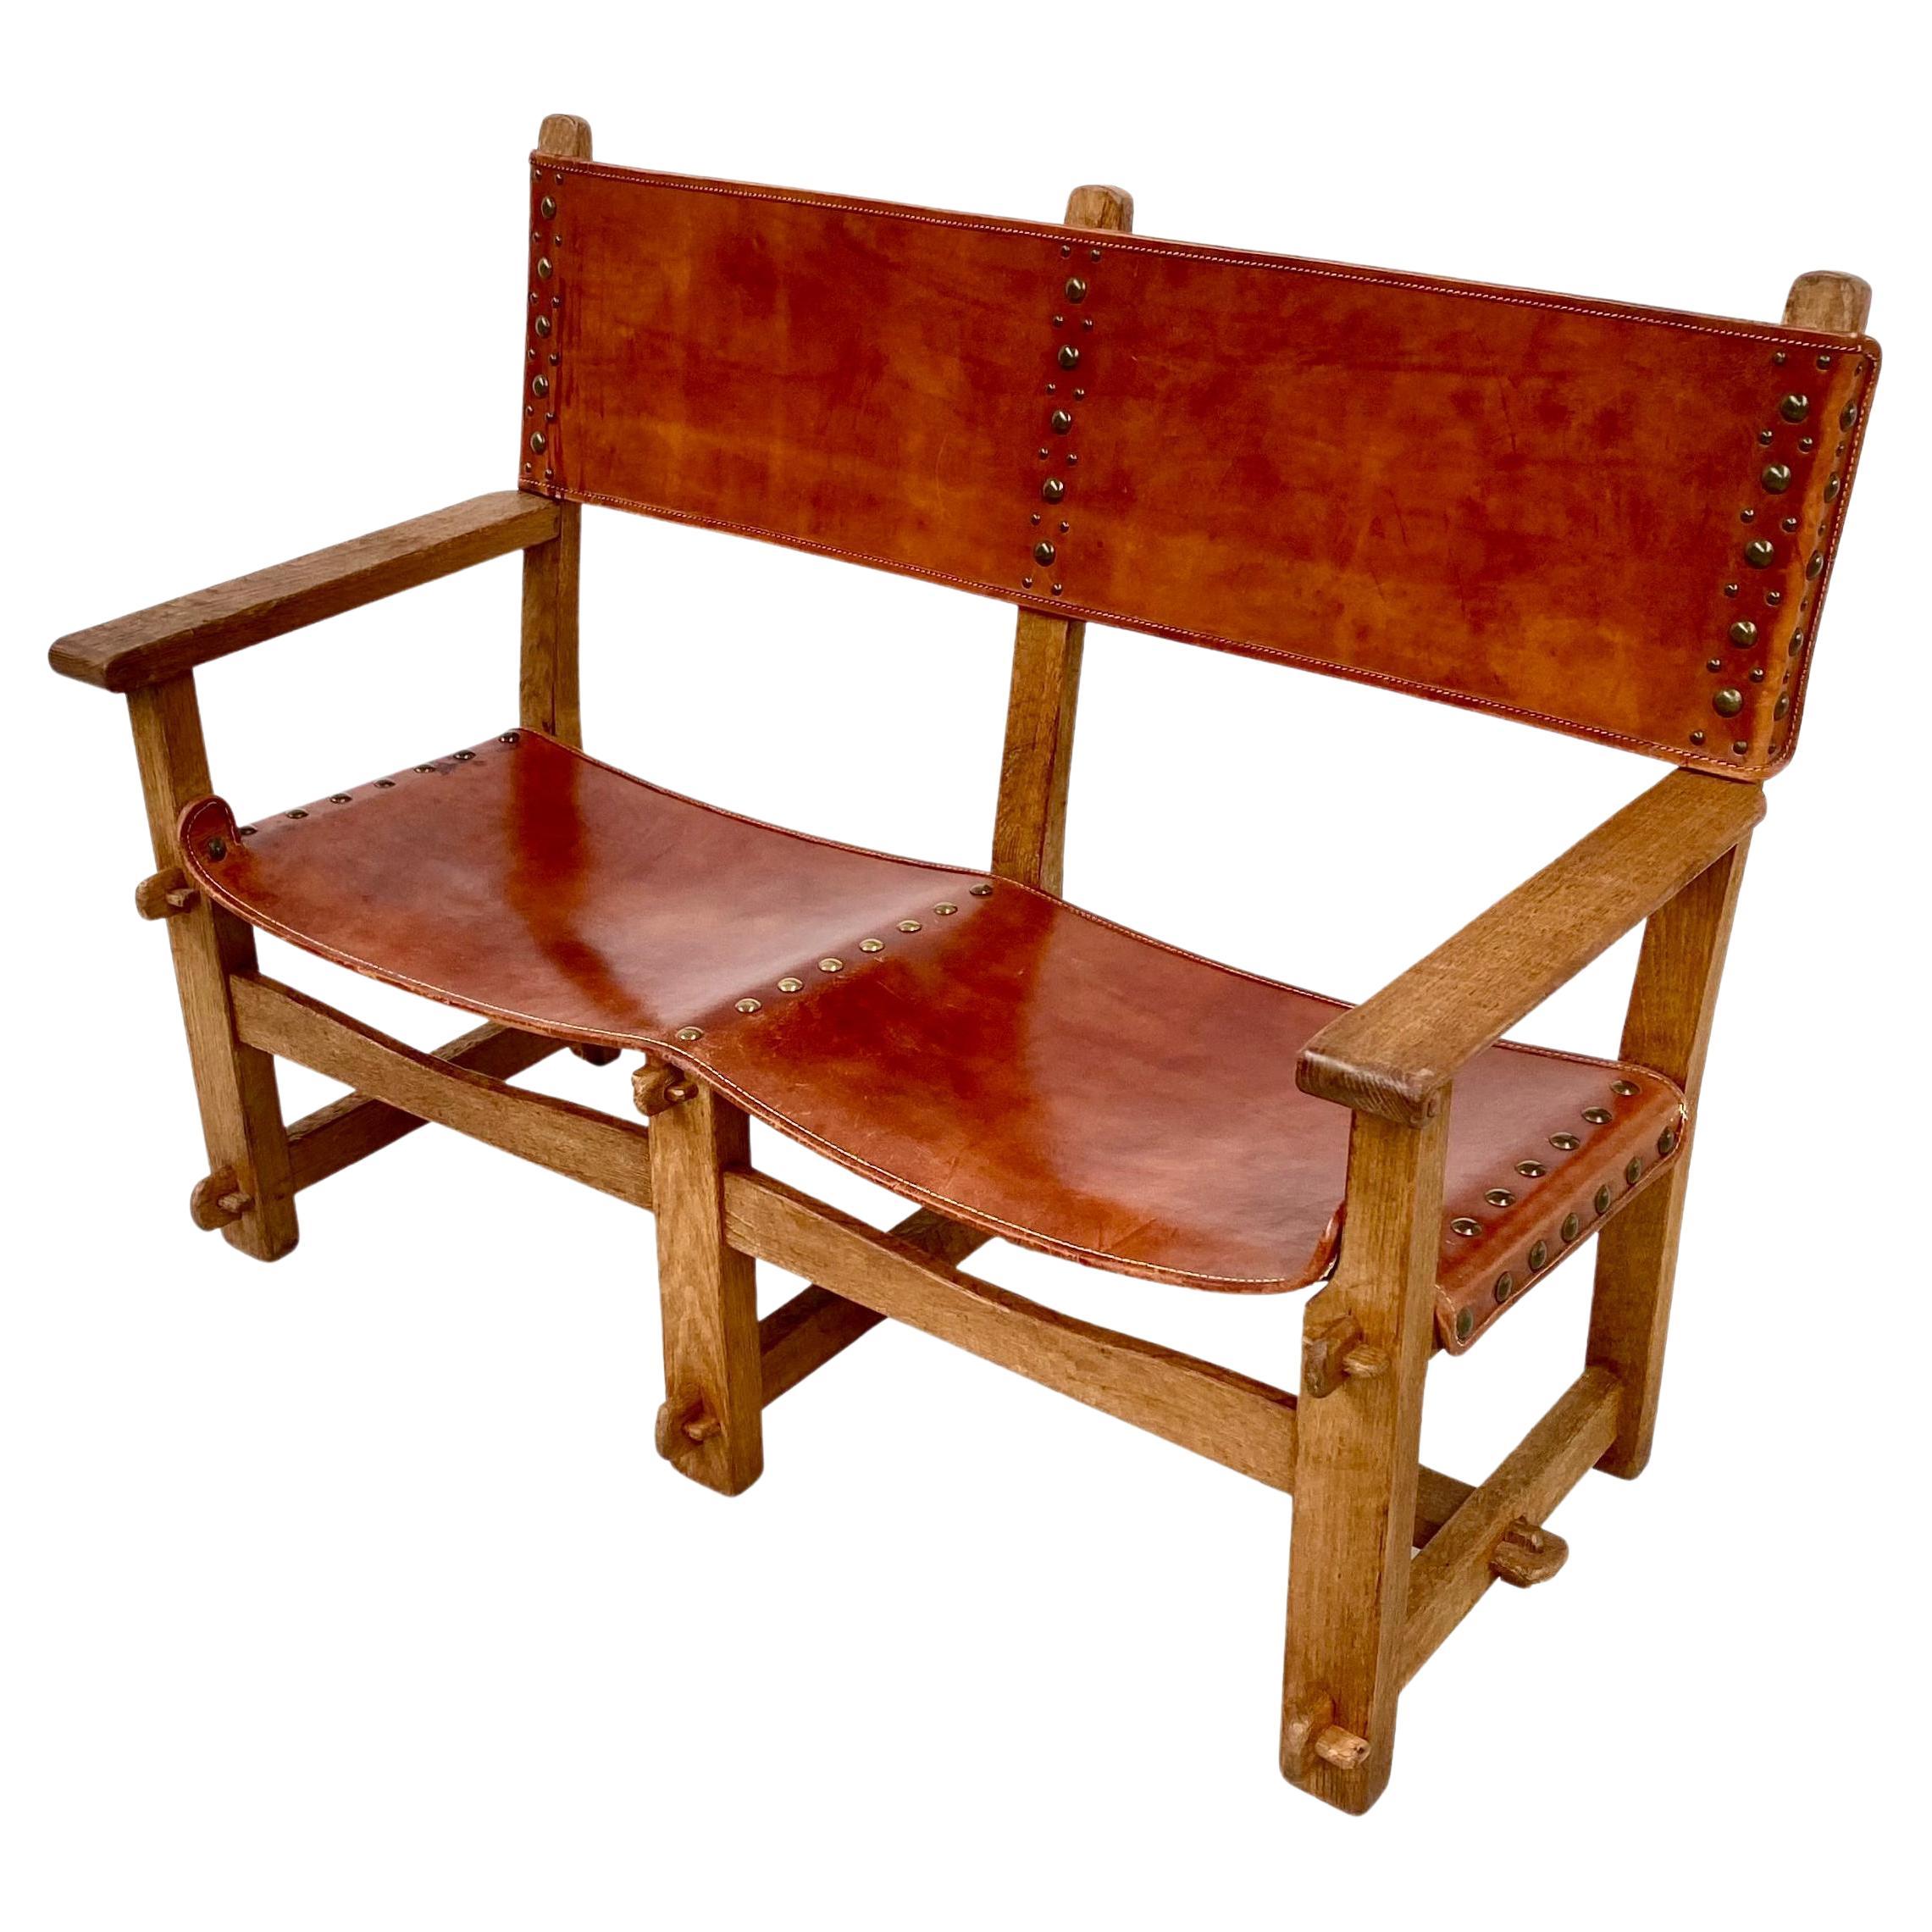 Antique Castle Bench in thick Cognac leather and oak wood. It was handmade in France in the late twenties. Handmade only from wood and leather. The patinated solid oak frame is handcrafted and the connections are made with wooden bobbins no nails or